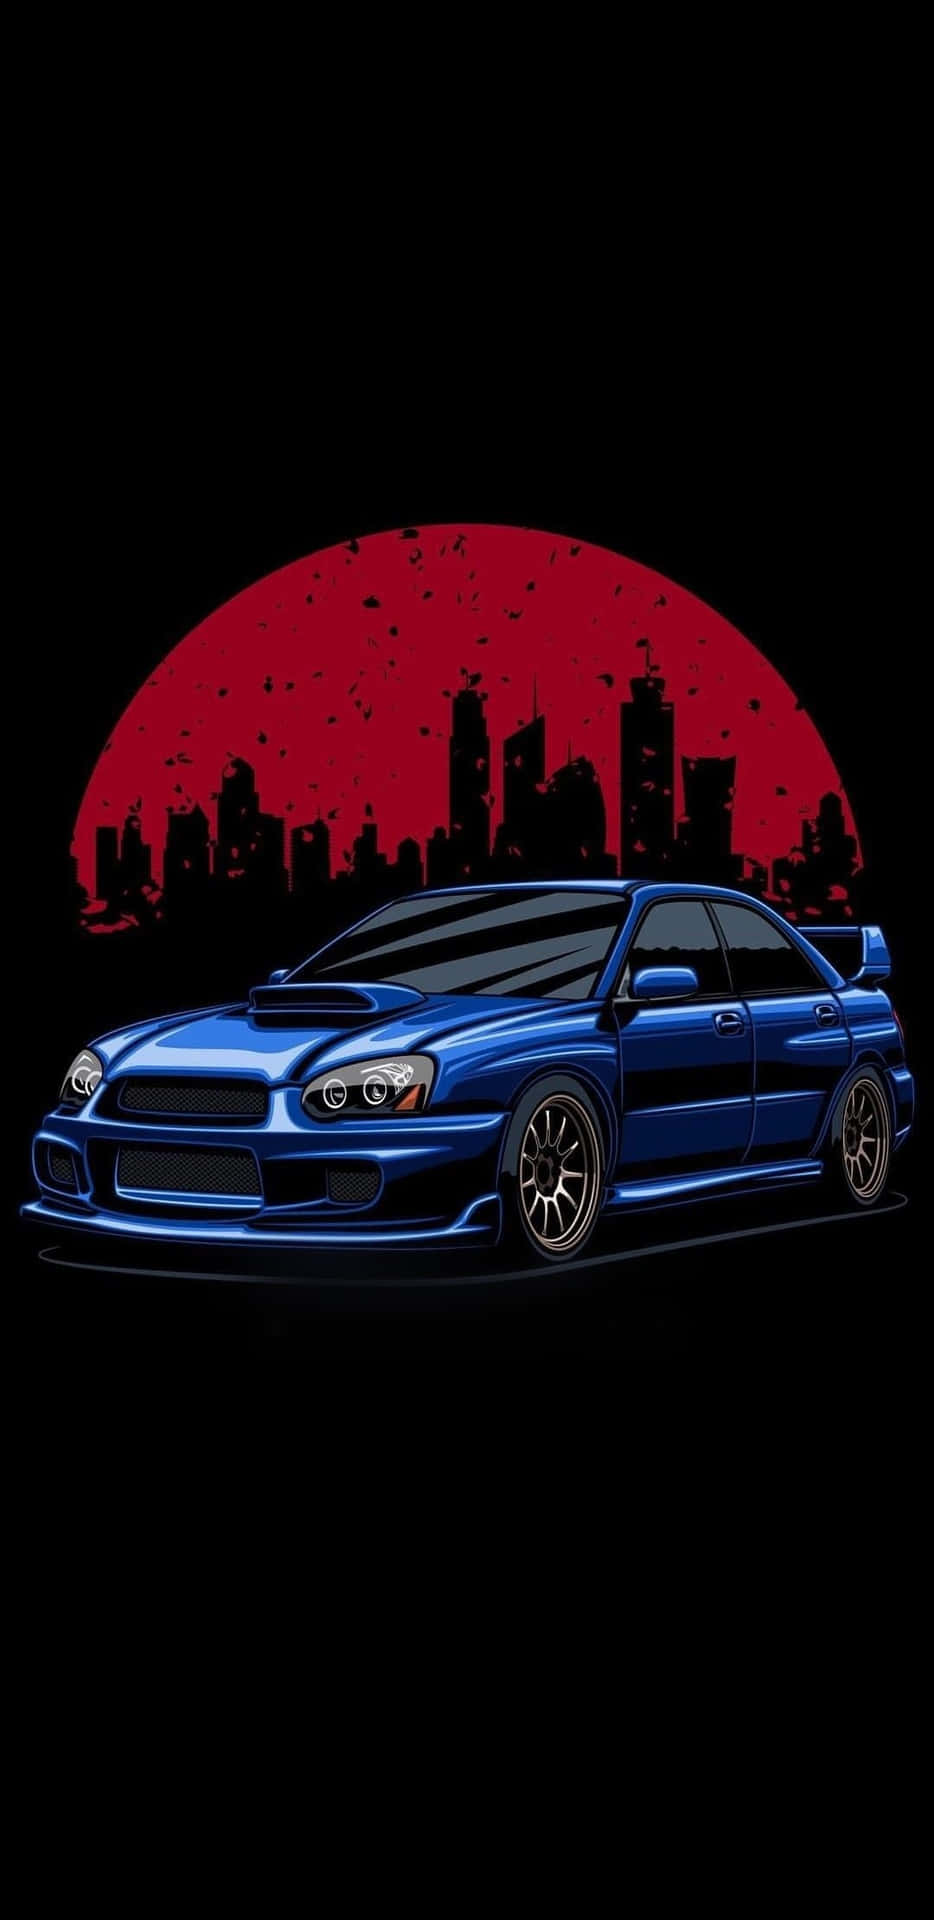 Eclectic and Energetic JDM Art Wallpaper